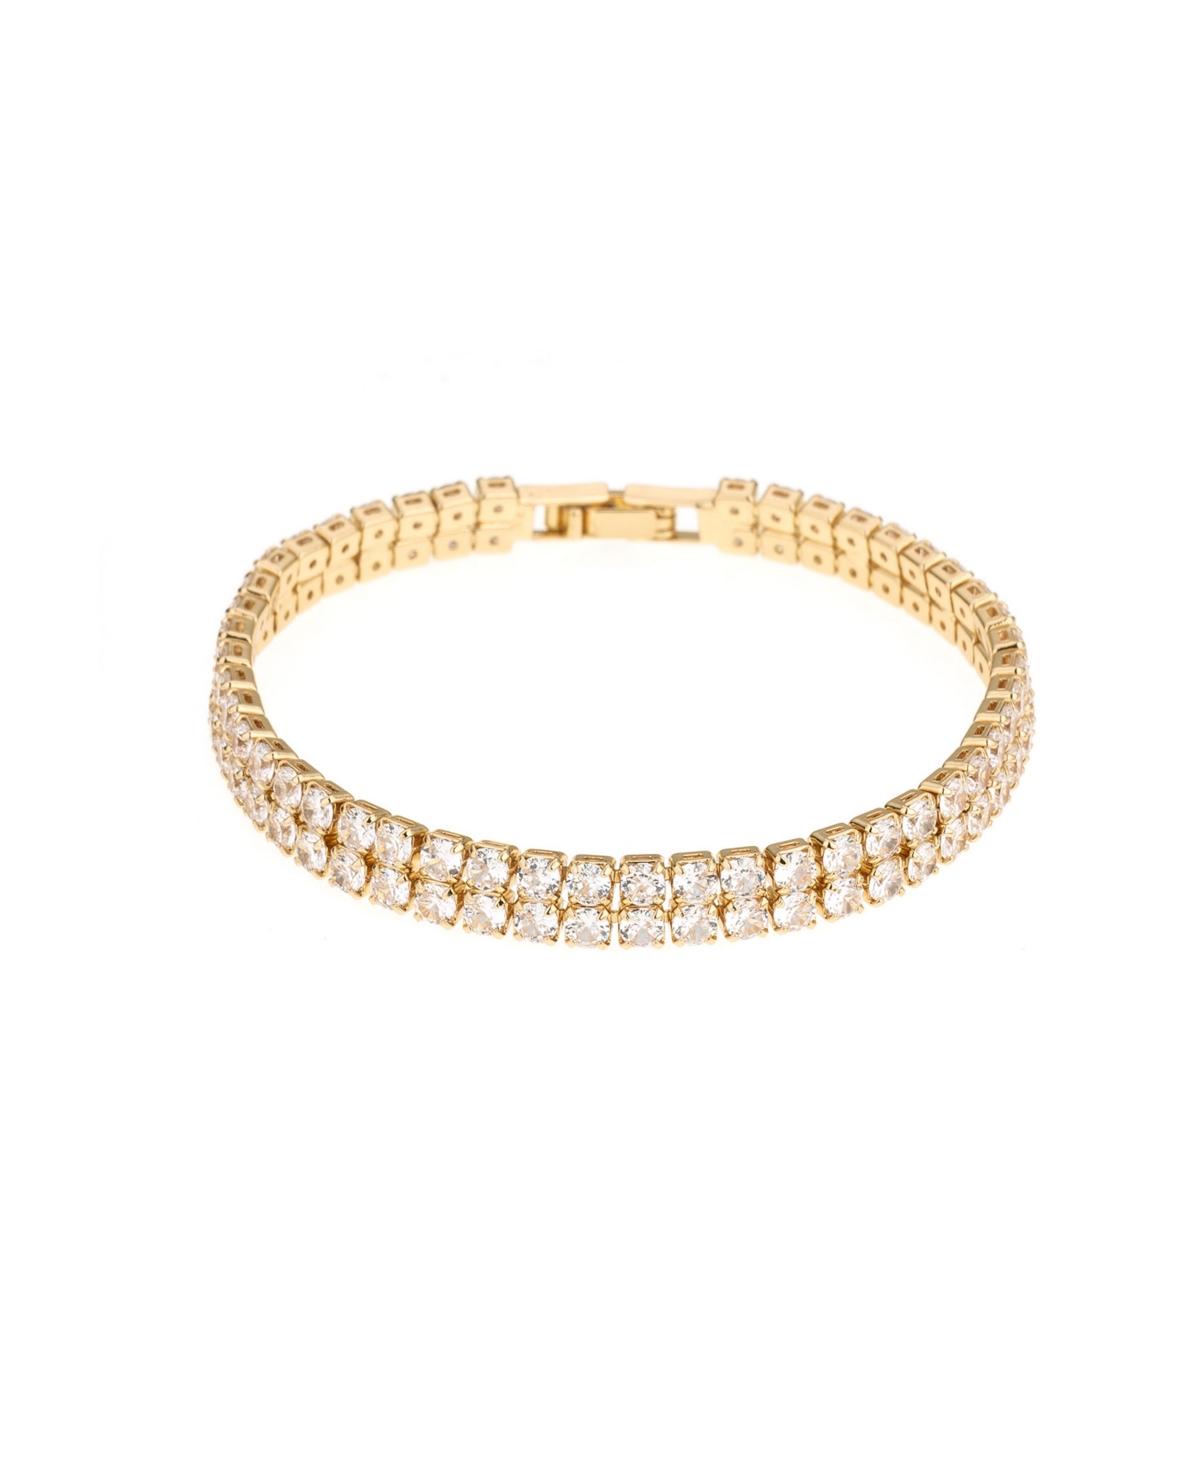 Thick Cubic Zirconia 18K Gold Plated Tennis Bracelet - Gold